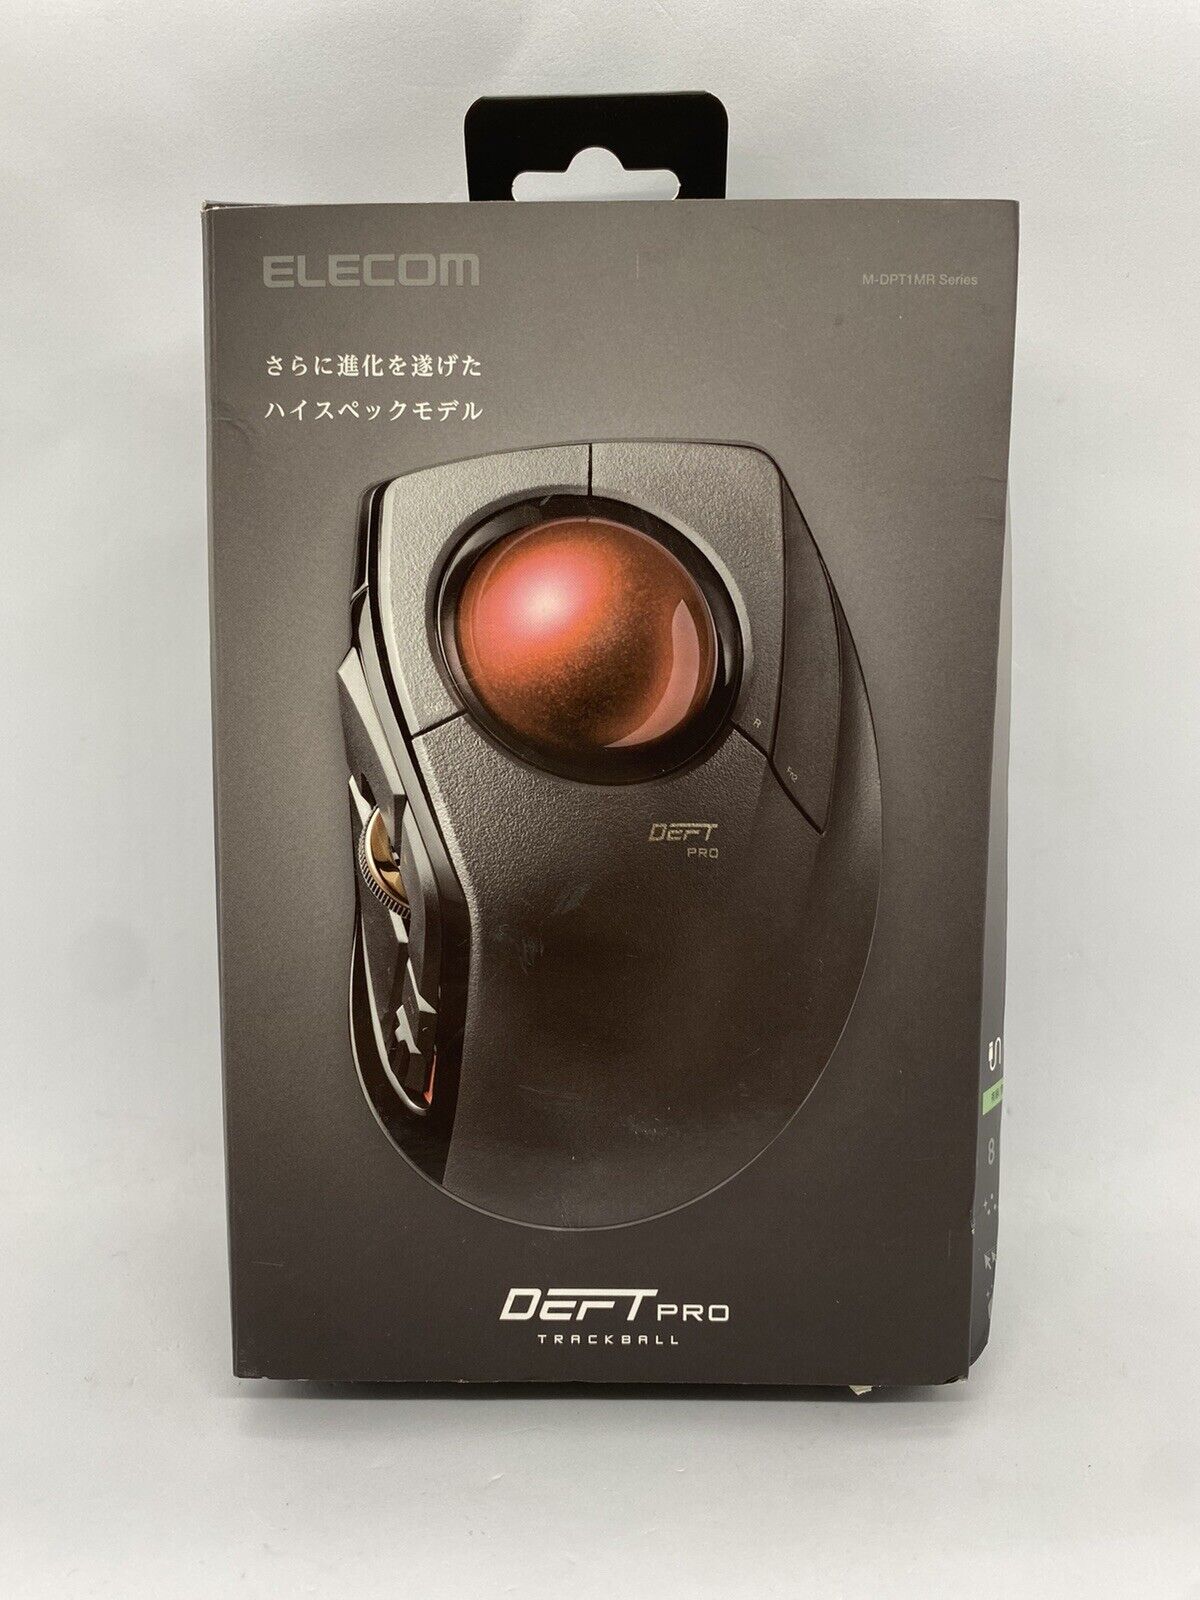 ELECOM Wired / Wireless / Bluetooth Finger-Operated Trackball Mouse M-DPT1MR